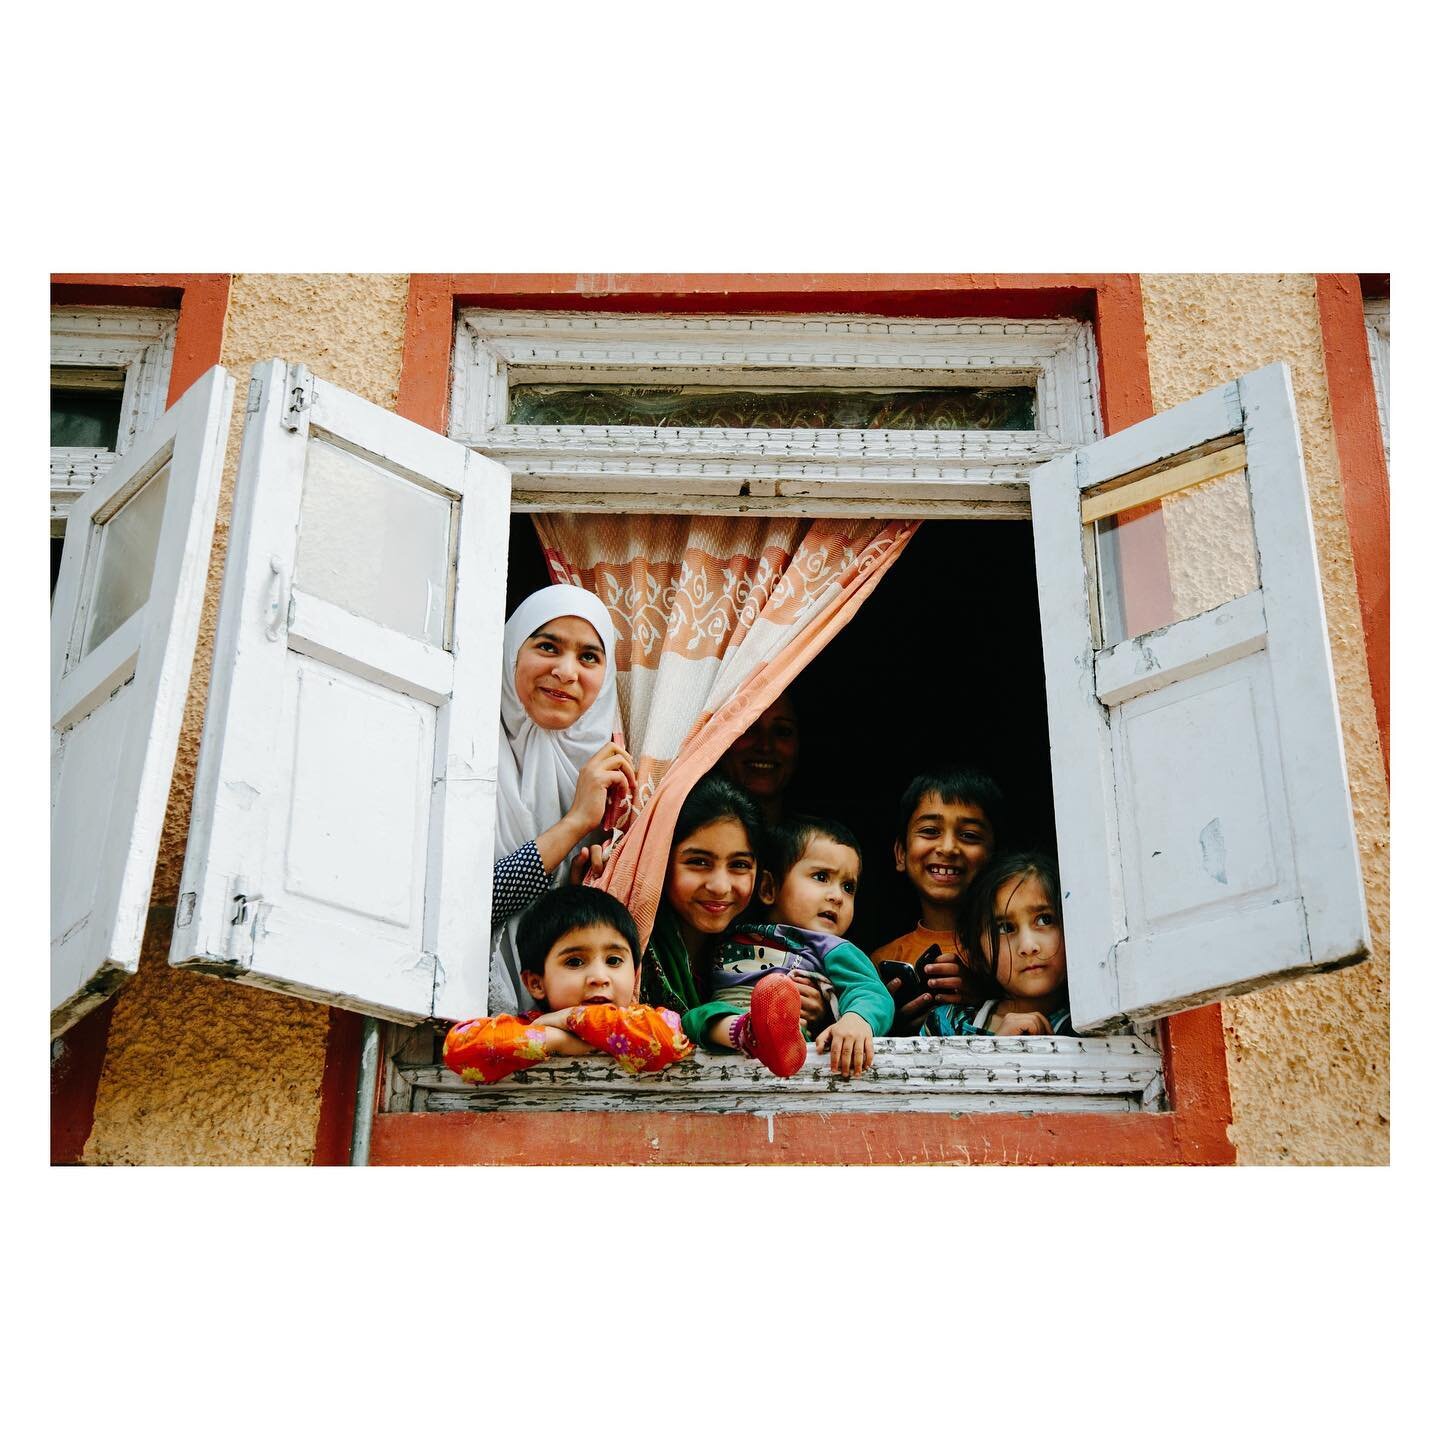 9 years ago I was just a baby photographer traveling in Kashmir (a place I barely knew existed growing up and couldn&rsquo;t believe I was actually in). Seeing my old work is fun.

There is a playfulness to it, a not trying too hard, just being and s